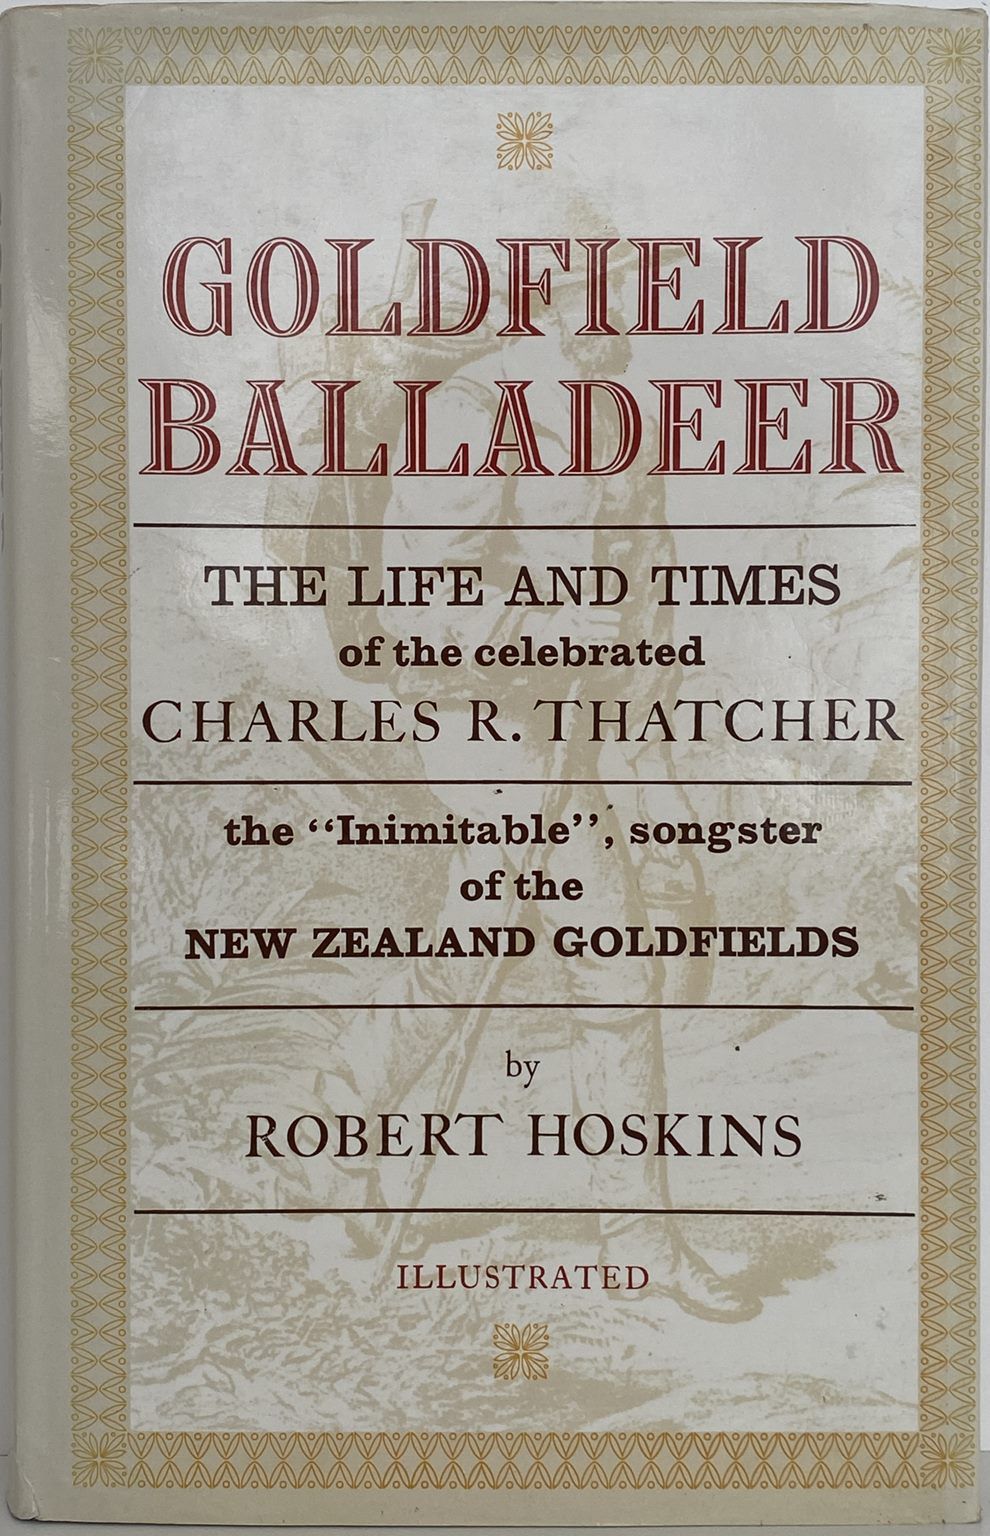 GOLDFIELD BALLADEER: The Life and Times of Charles R. Thatcher